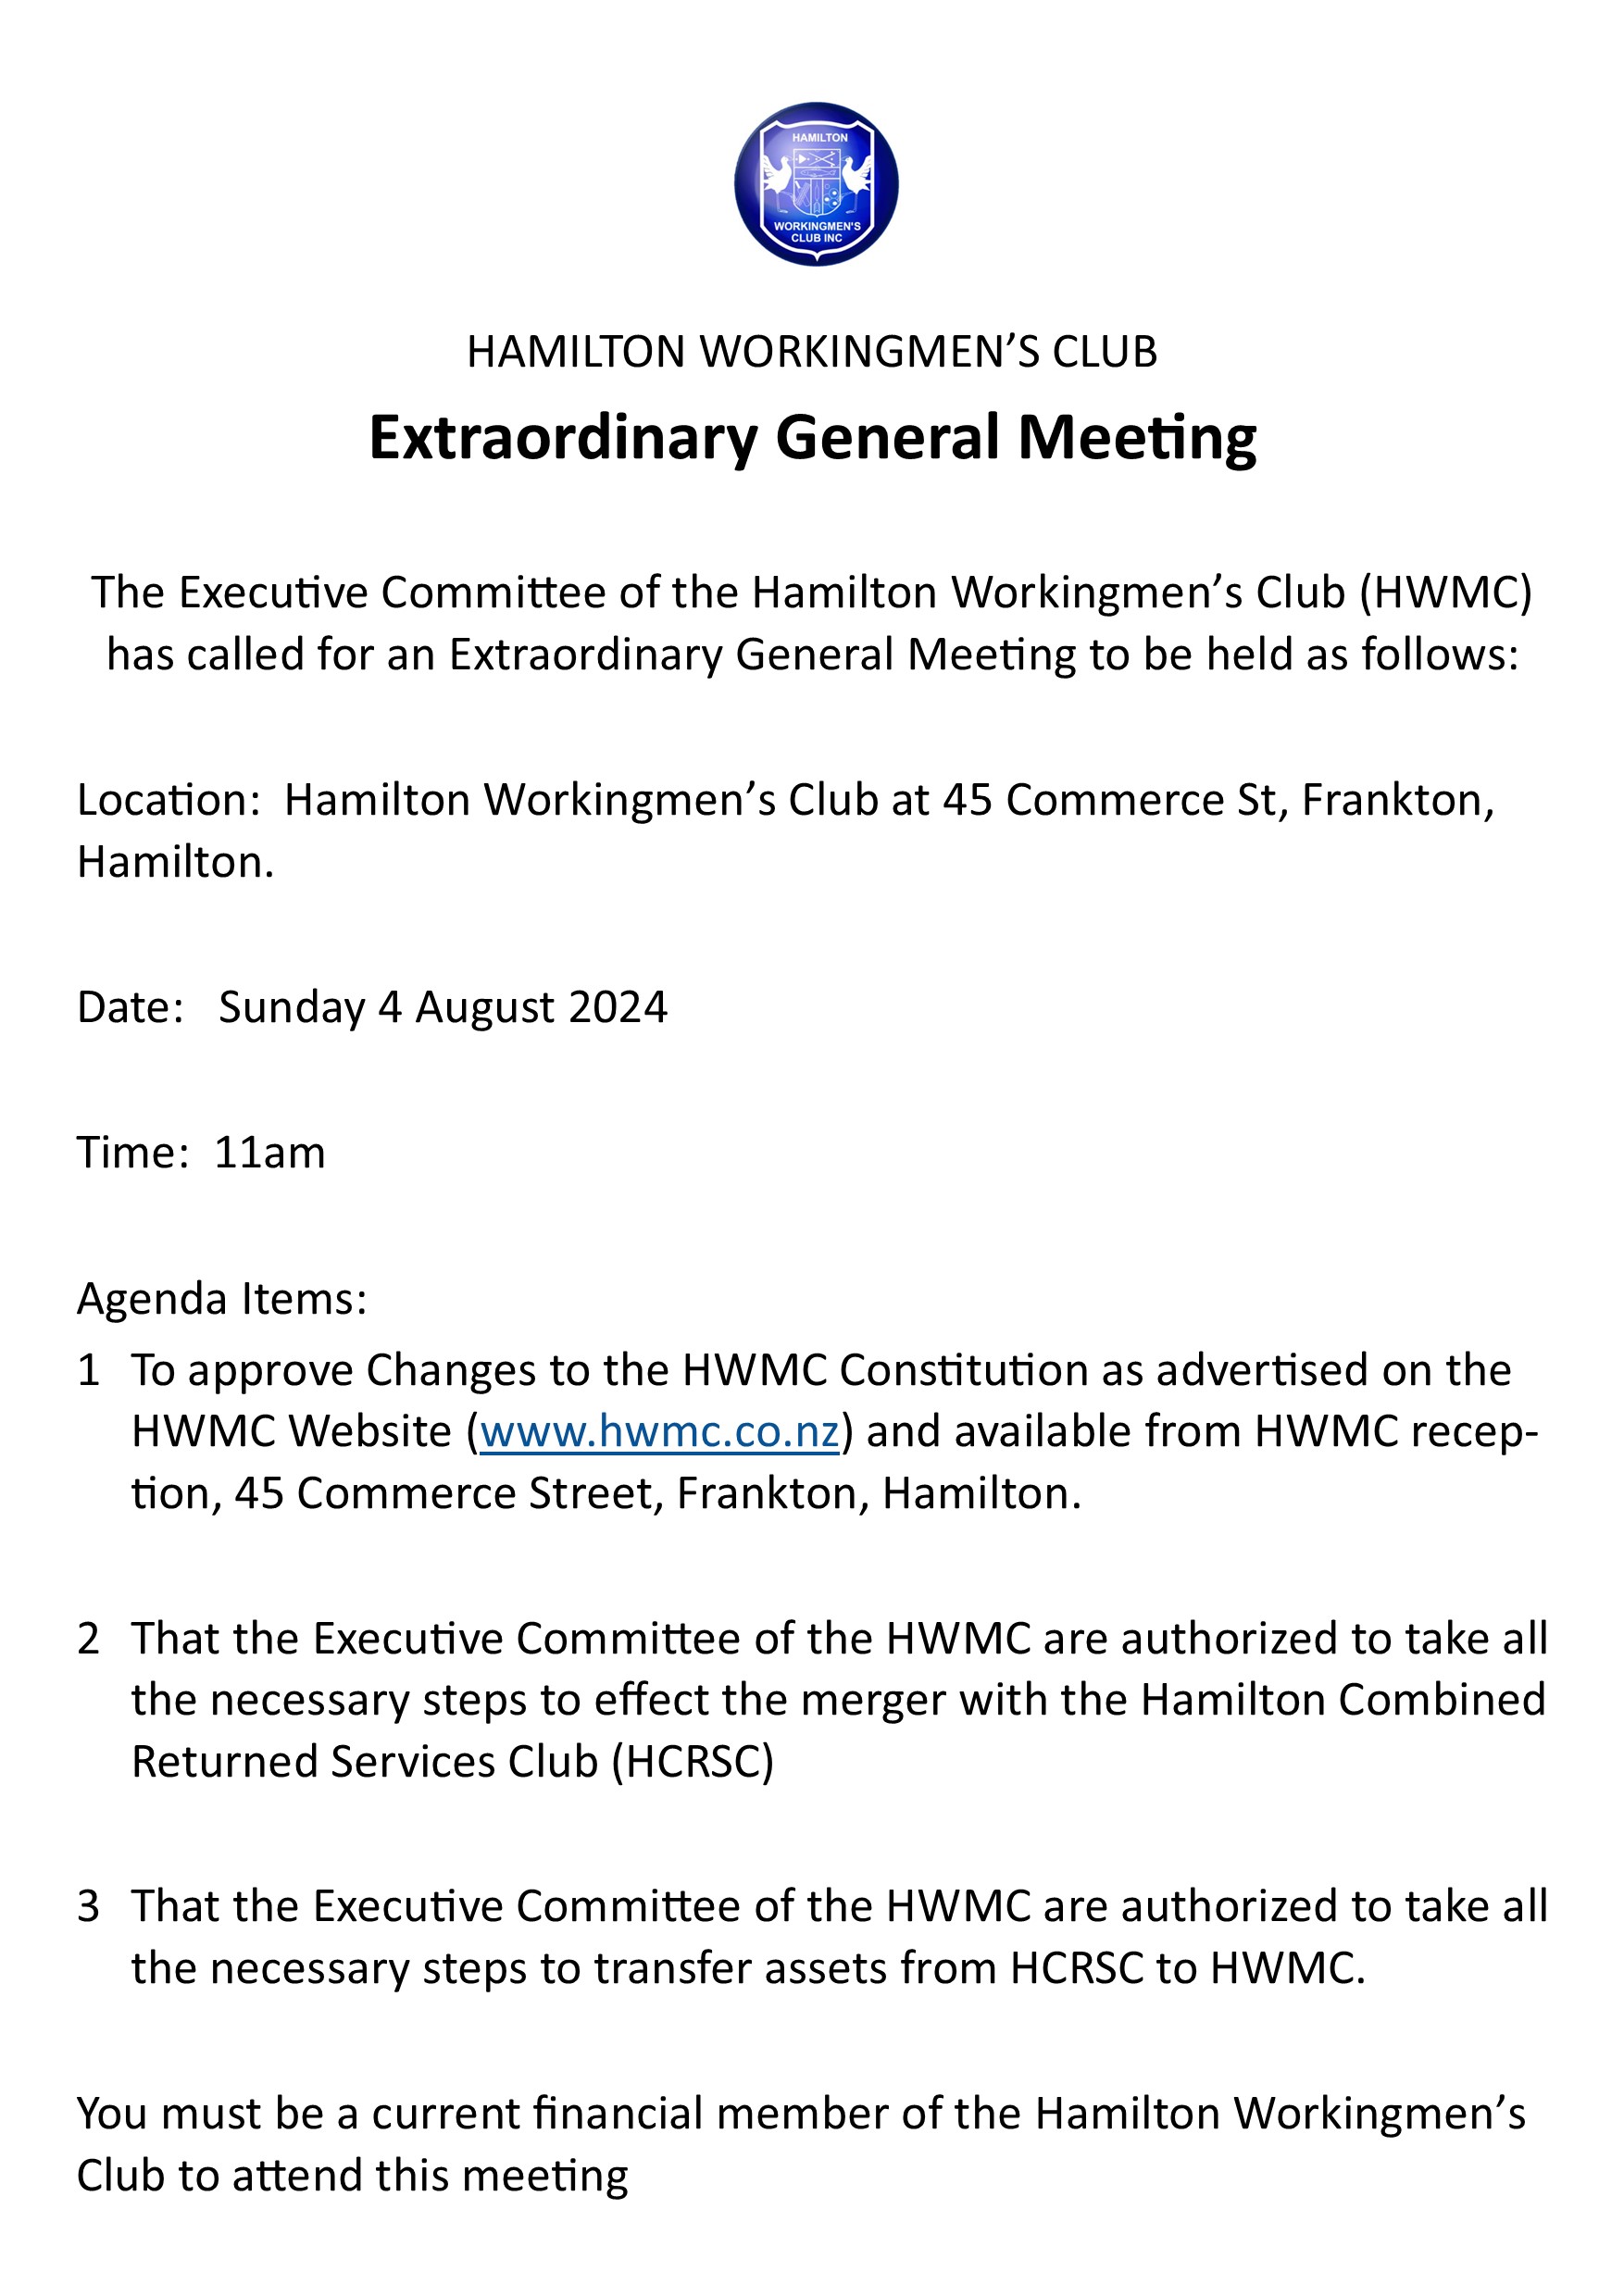 Noticeboard Copy of Extraordinary Meeting Merge with Hamilton Combined Returned Services